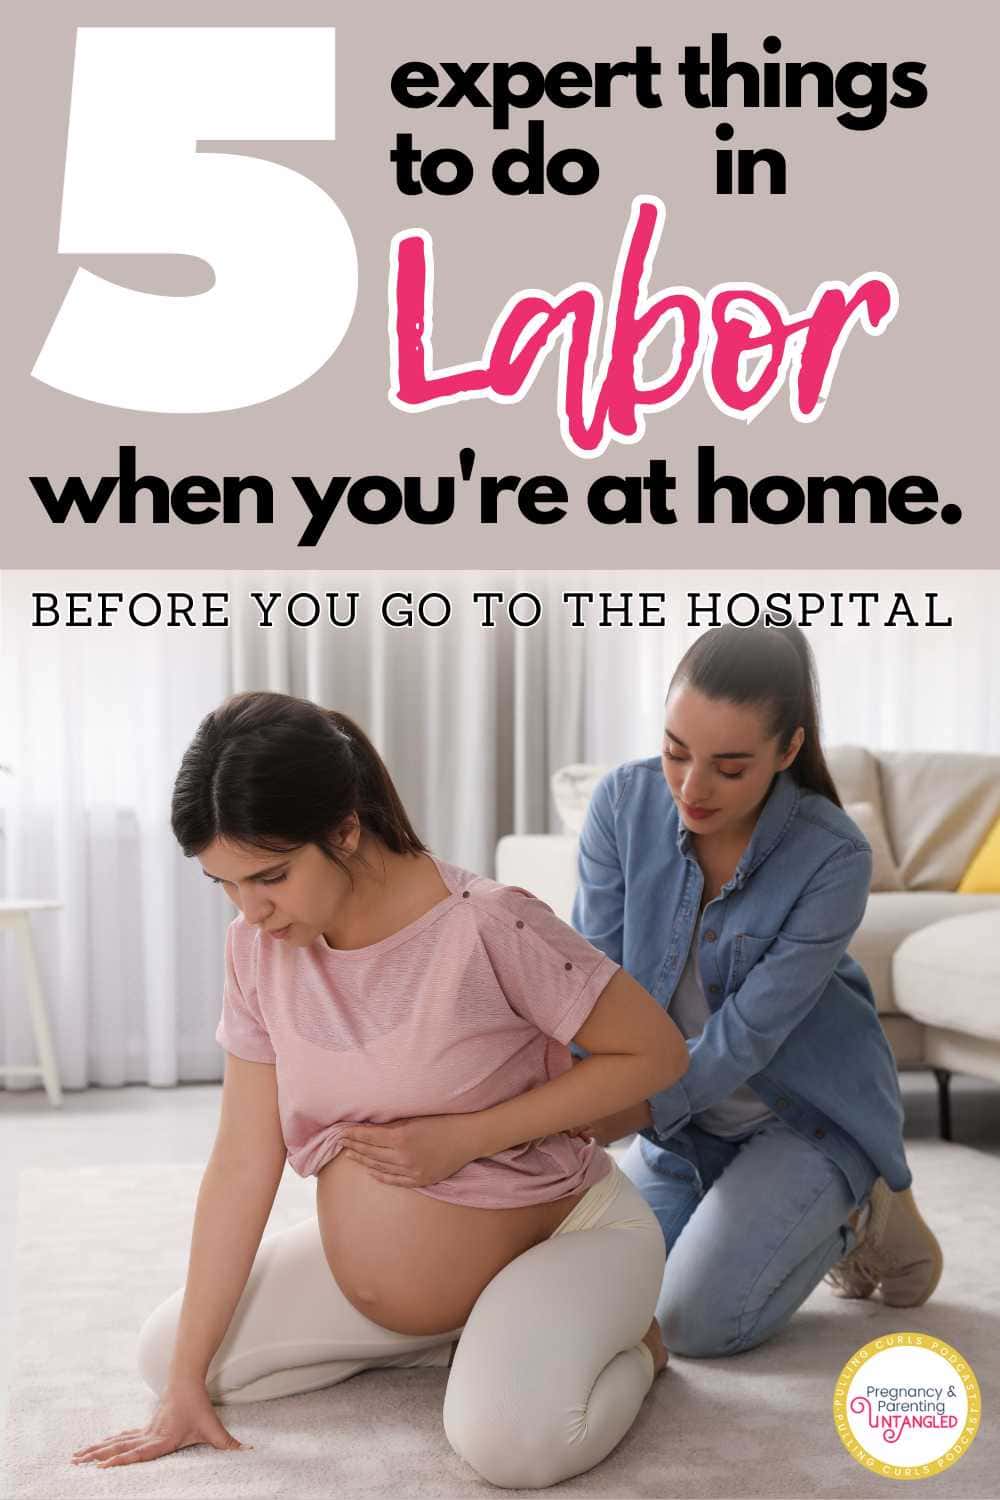 "5 Things To Do While in Labor at Home: A helpful guide for expectant mothers. Get tips on how to make the most of early labor at home, including sleeping, changing positions, cooking, watching TV, and dancing. Discover how these activities can distract from the pain and keep you active. Learn about the importance of adding music, cleaning (especially the bathroom), eating balanced snacks, and staying hydrated. Plus, find out how partners can assist during this crucial time. Get expert advice from a nurse and mother of three on The Pulling Curls Podcast, where pregnancy and parenting are untangled. #pregnancy #parenting #laborathome #earlylabor" via @pullingcurls